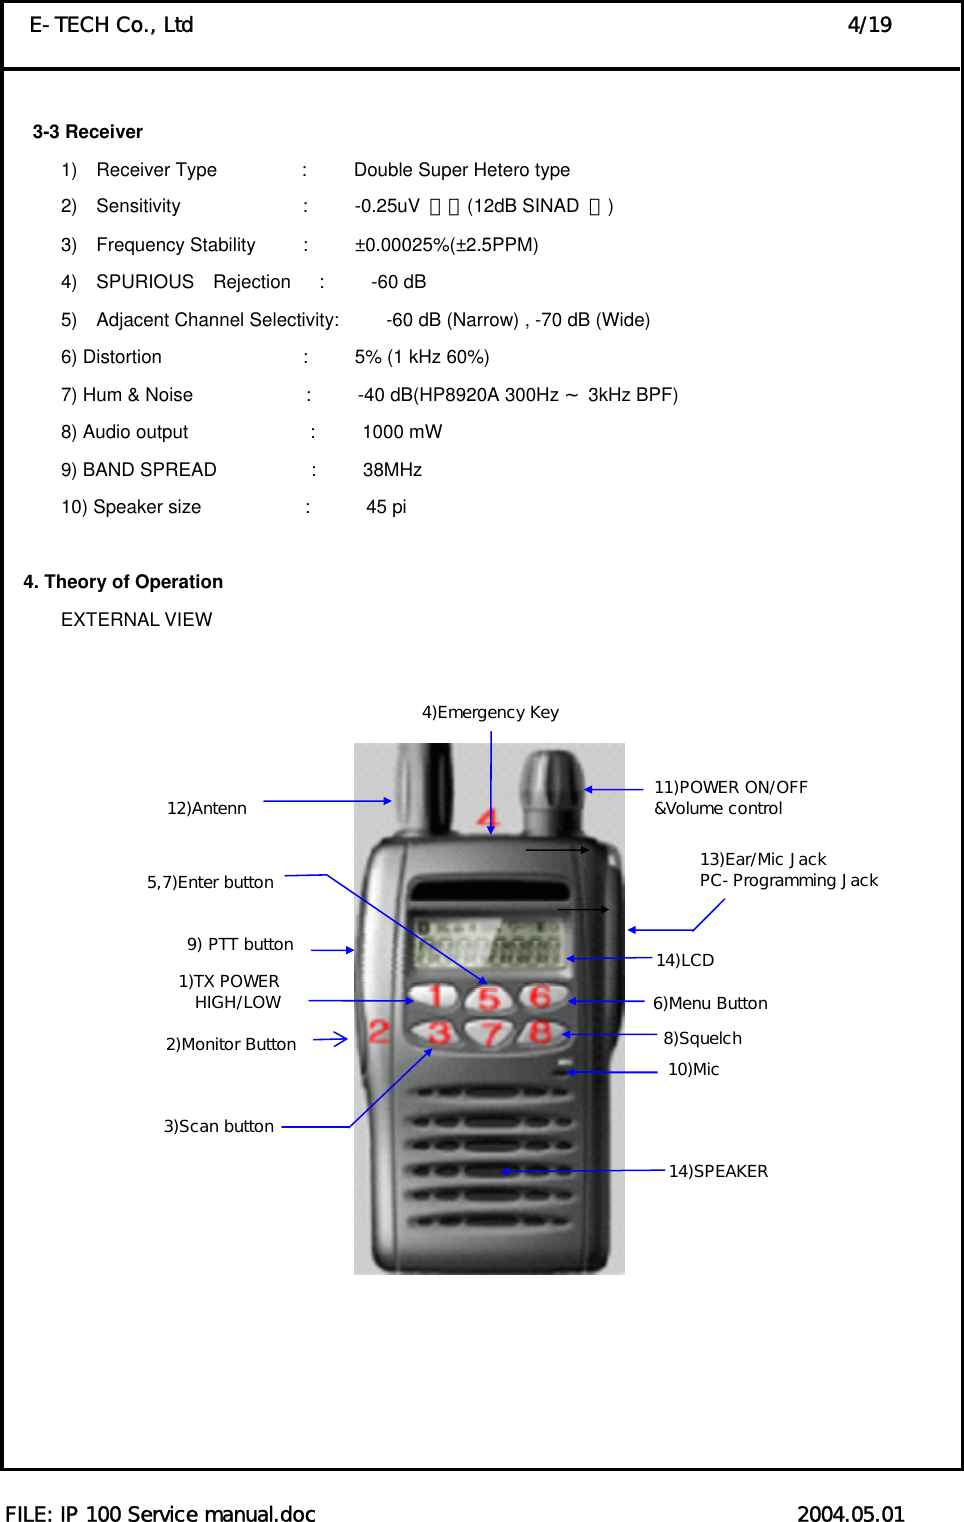  FILE: IP 100 Service manual.doc                                               2004.05.01 E-TECH Co., Ltd                                                                4/19    3-3 Receiver       1)  Receiver Type         :     Double Super Hetero type       2)  Sensitivity             :     -0.25uV 이하(12dB SINAD  시)       3)  Frequency Stability     :     ±0.00025%(±2.5PPM)       4)  SPURIOUS  Rejection   :     -60 dB       5)  Adjacent Channel Selectivity:     -60 dB (Narrow) , -70 dB (Wide)       6) Distortion               :     5% (1 kHz 60%)       7) Hum &amp; Noise            :     -40 dB(HP8920A 300Hz   3kHz ～BPF)       8) Audio output             :     1000 mW       9) BAND SPREAD          :     38MHz       10) Speaker size           :      45 pi  4. Theory of Operation EXTERNAL VIEW          12)Antenn4)Emergency Key9) PTT button 10)Mic2)Monitor Button 14)LCD1)TX POWER HIGH/LOW 3)Scan button 8)Squelch 6)Menu Button 11)POWER ON/OFF &amp;Volume control 13)Ear/Mic Jack PC-Programming Jack 14)SPEAKER 5,7)Enter button 